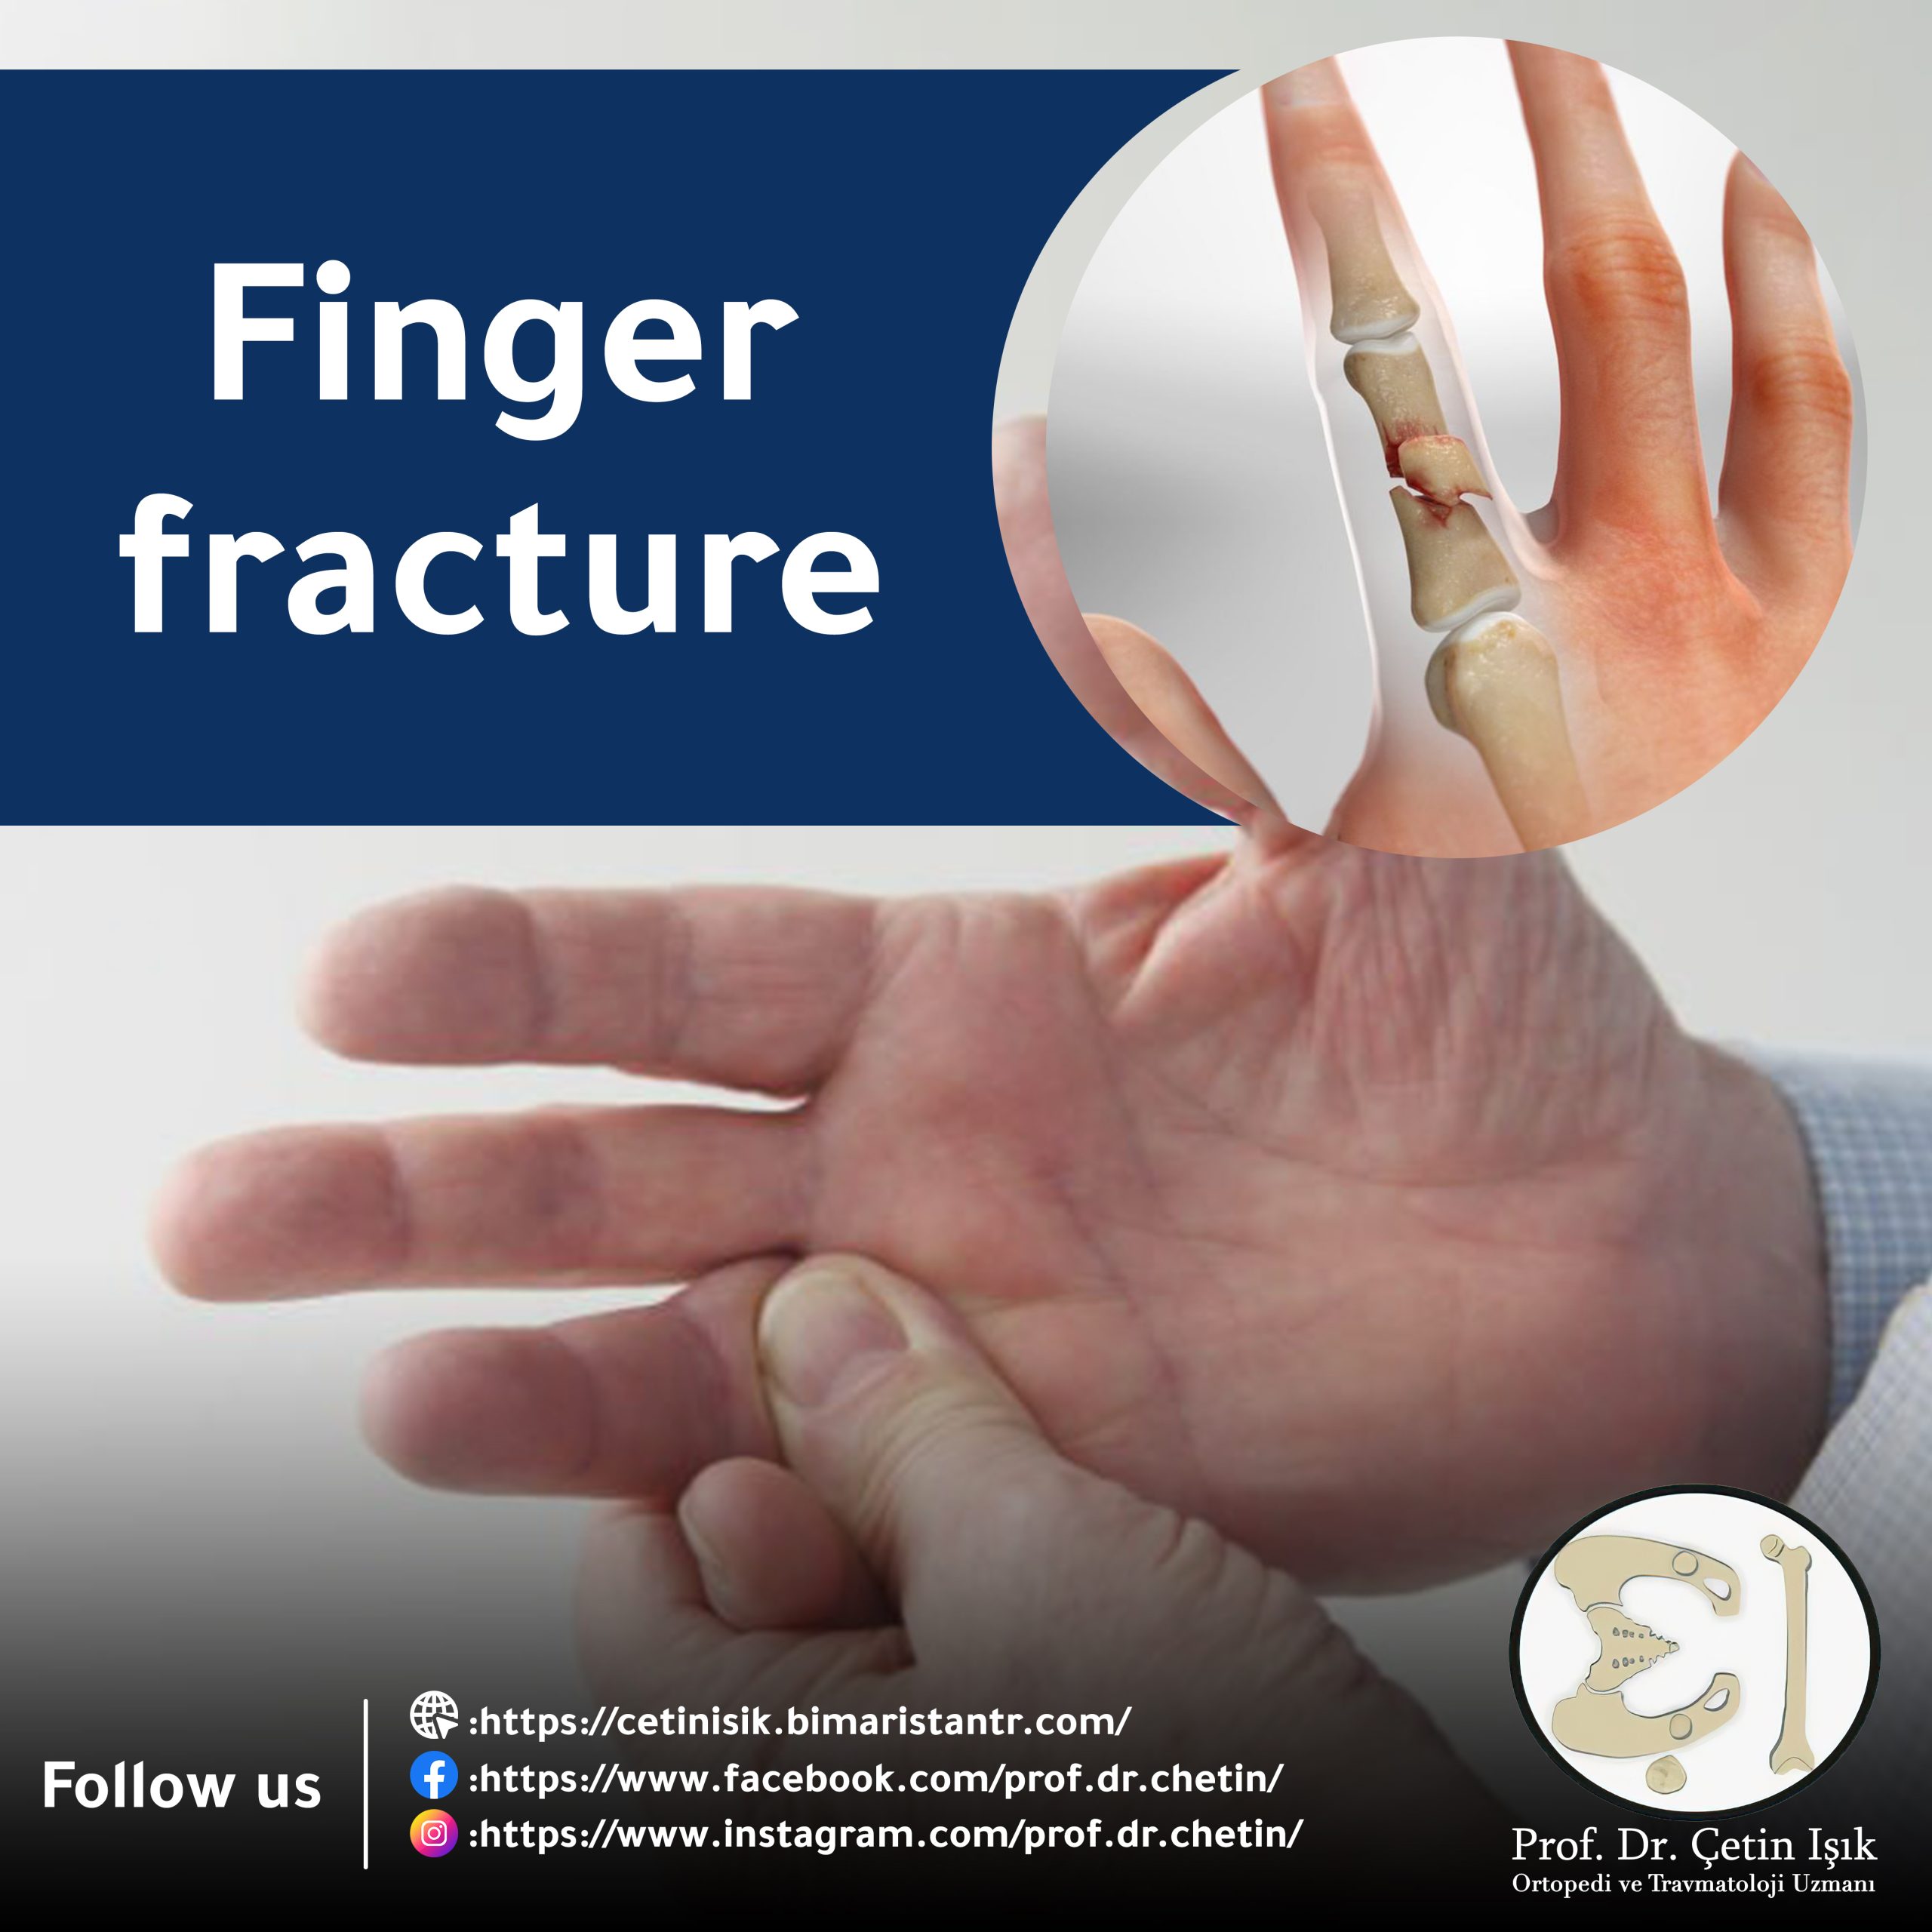 Cover image of a broken finger article